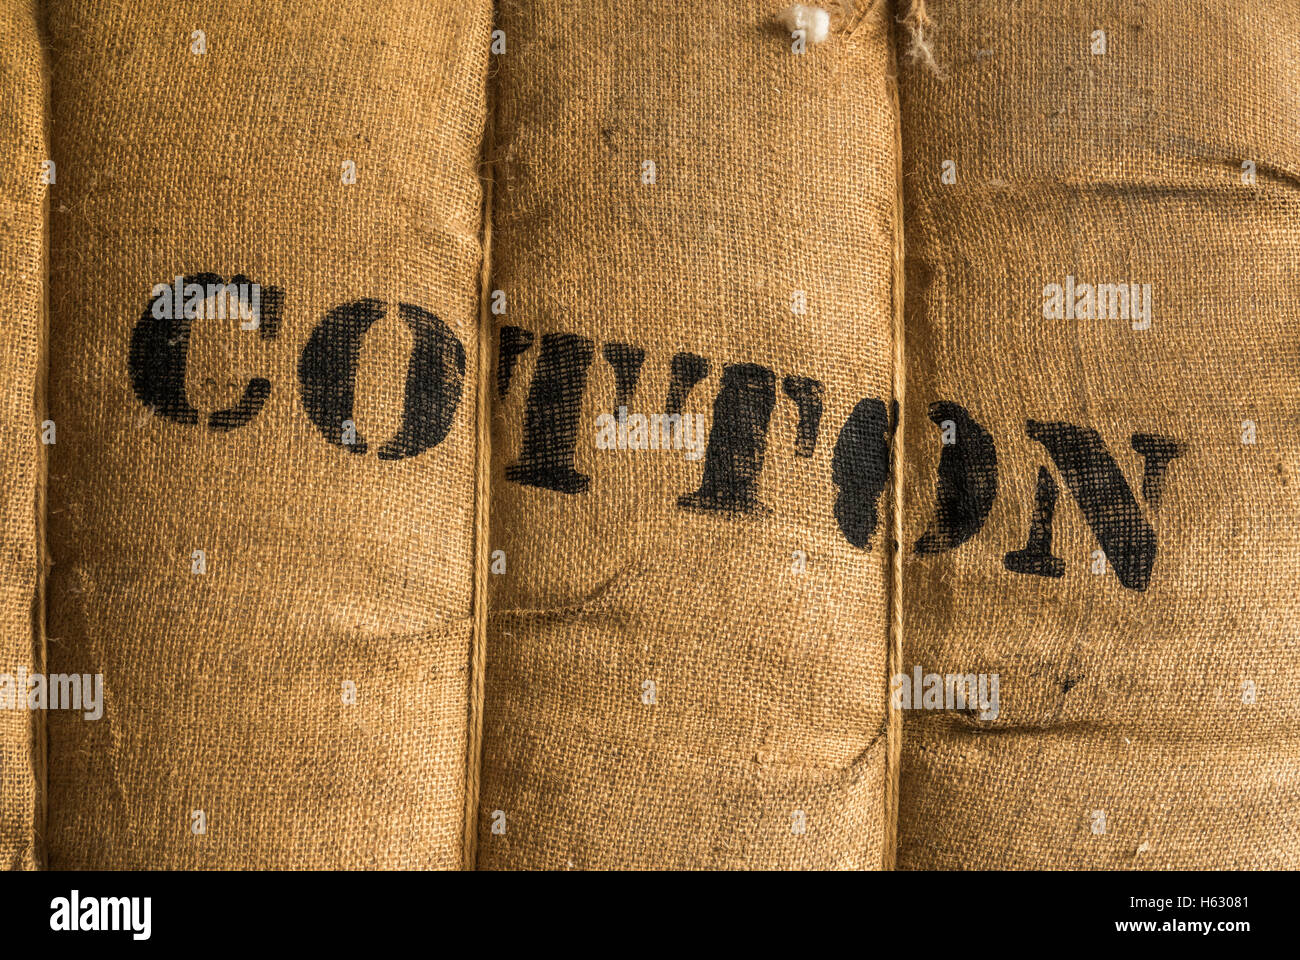 A Bale Of Cotton Stock Photo